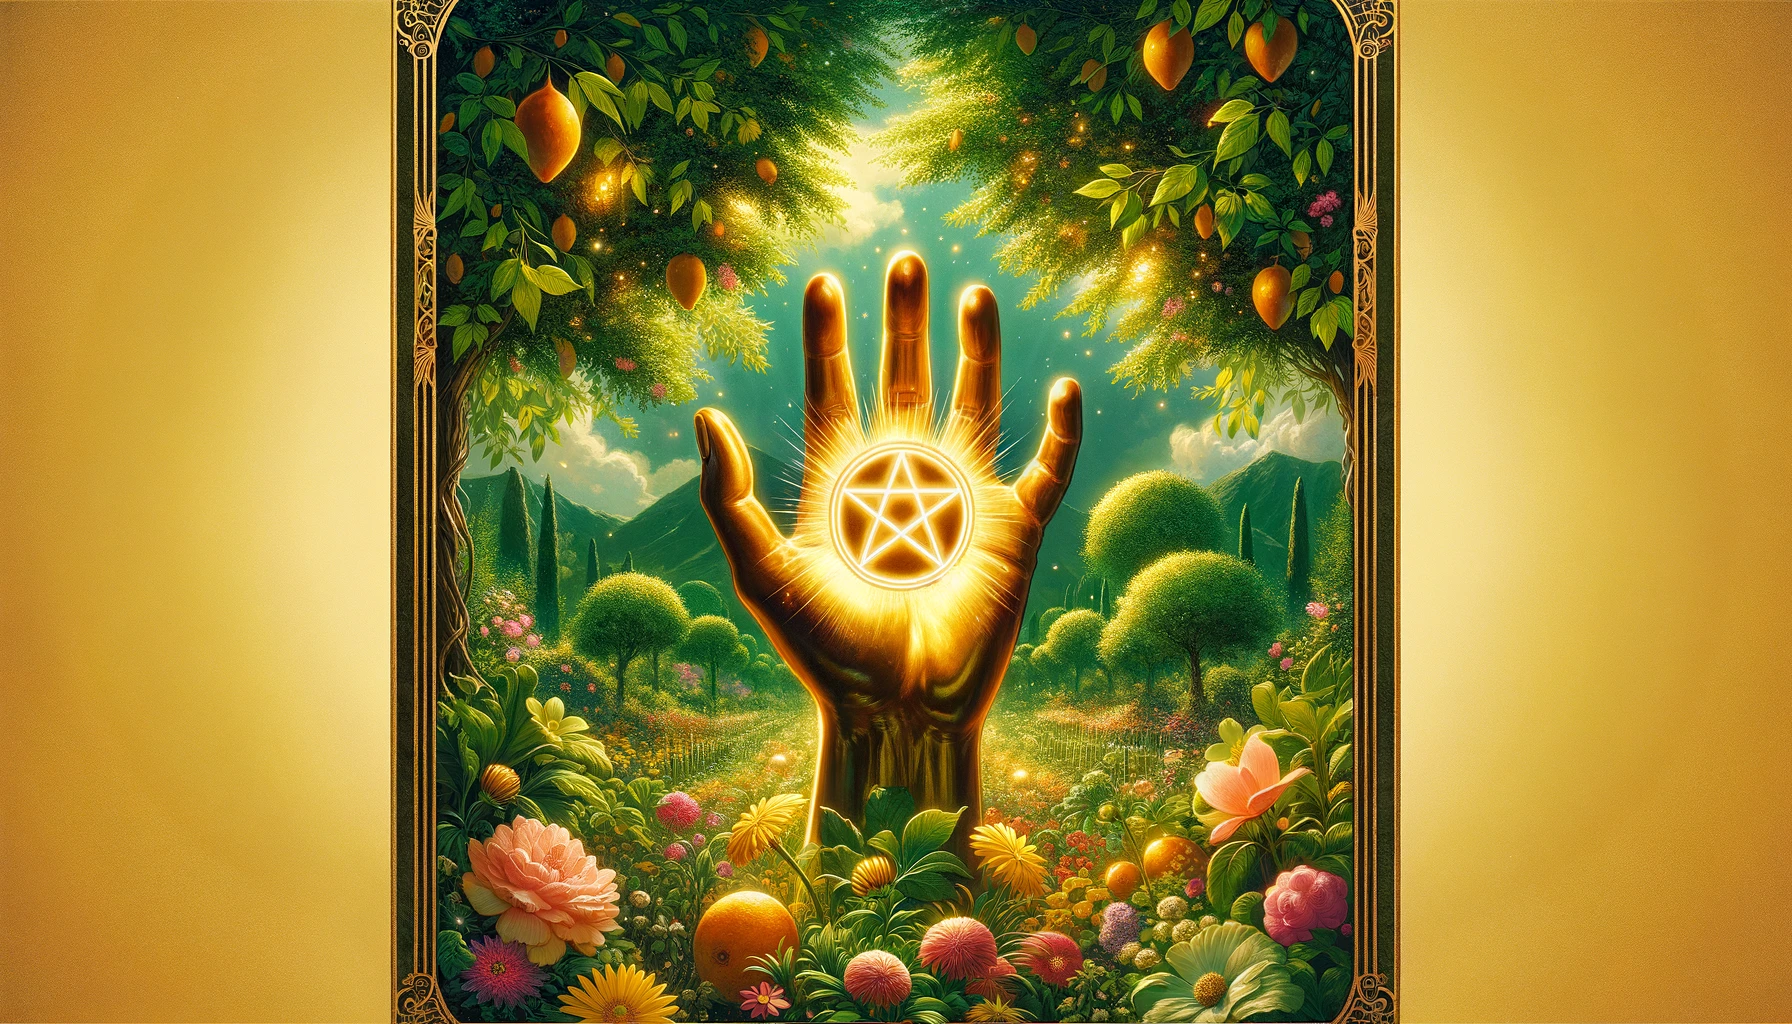 a 169 image showcasing the Ace of Pentacles tarot card The scene should feature a golden hand emerging gracefully from a lush vibrant garden The garden is teeming with greenery